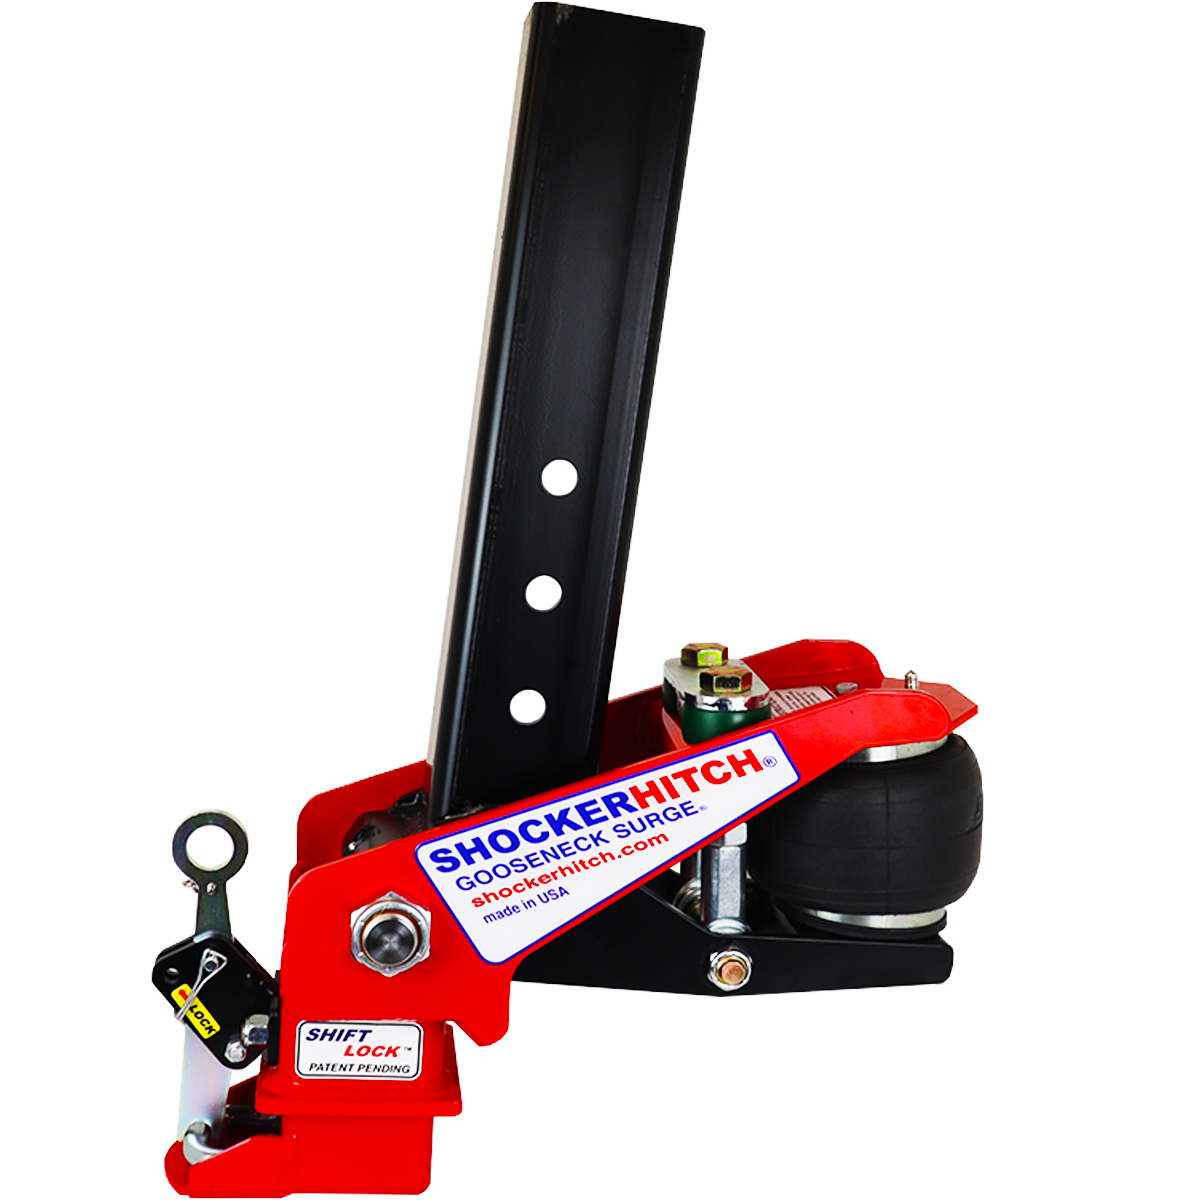 Trailer 26 Tow Hitch Step with Hitch Lock for 2 Inch Receiver